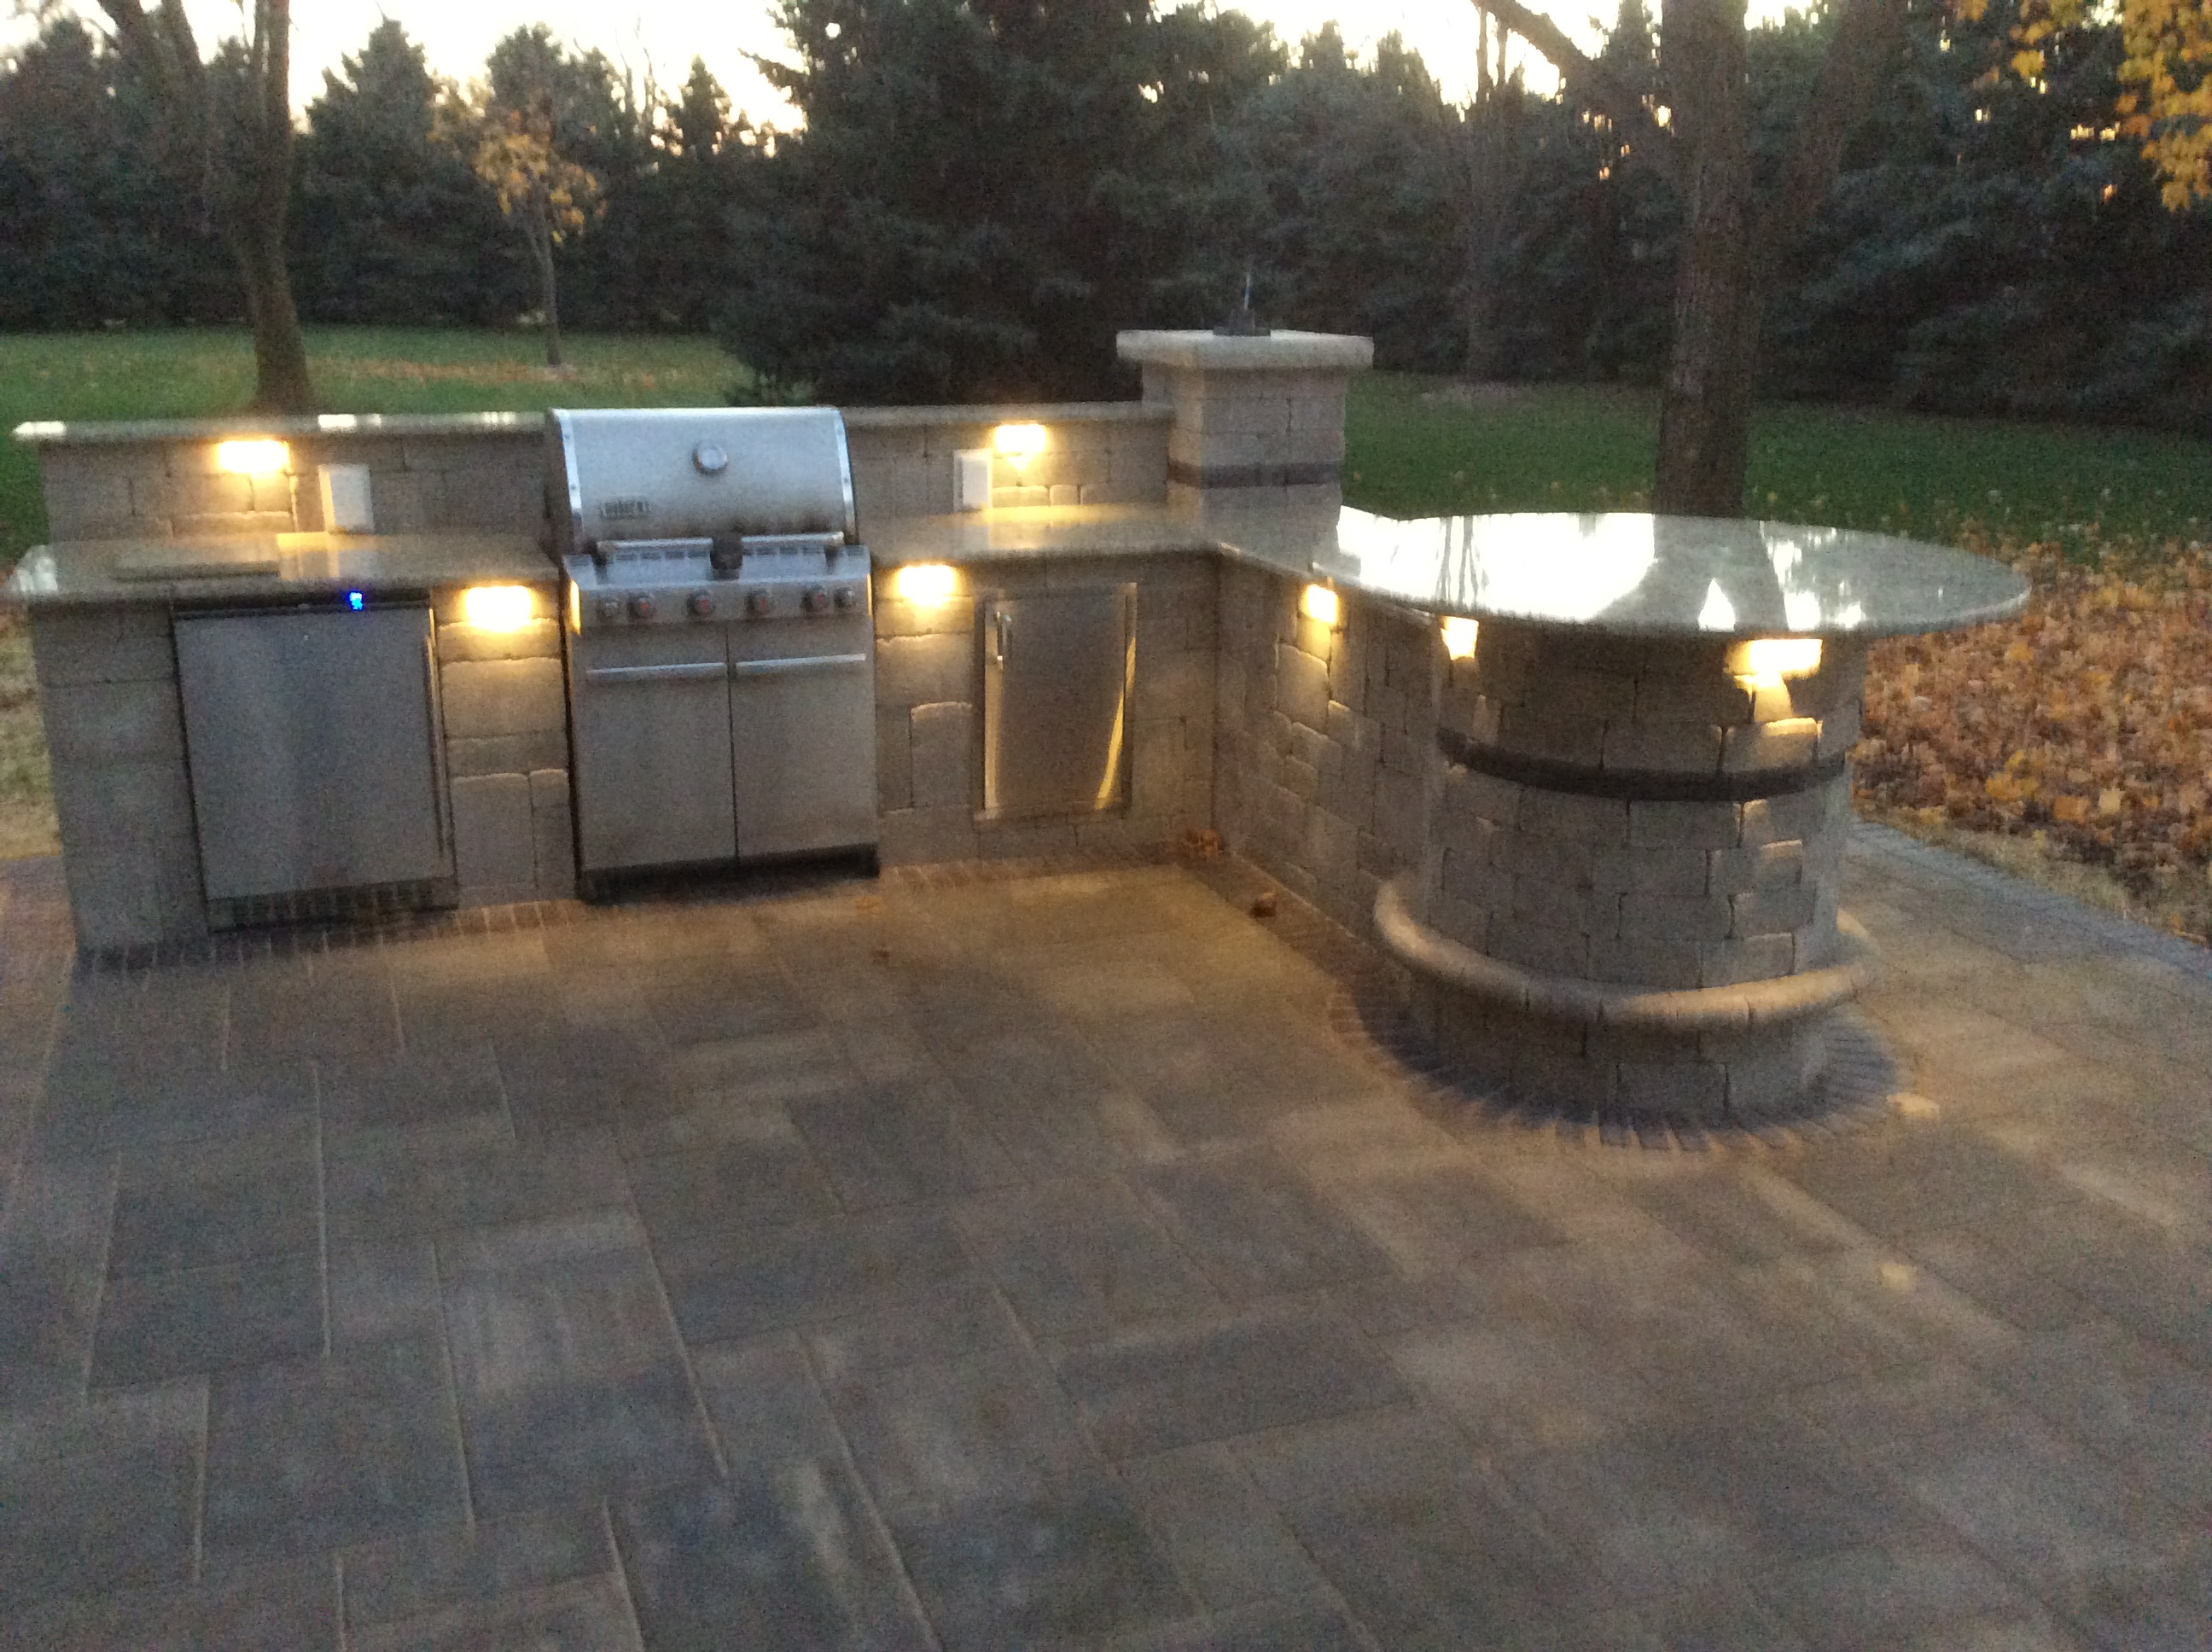 outdoor kitchen with grill and bar seating at dusk with lights on